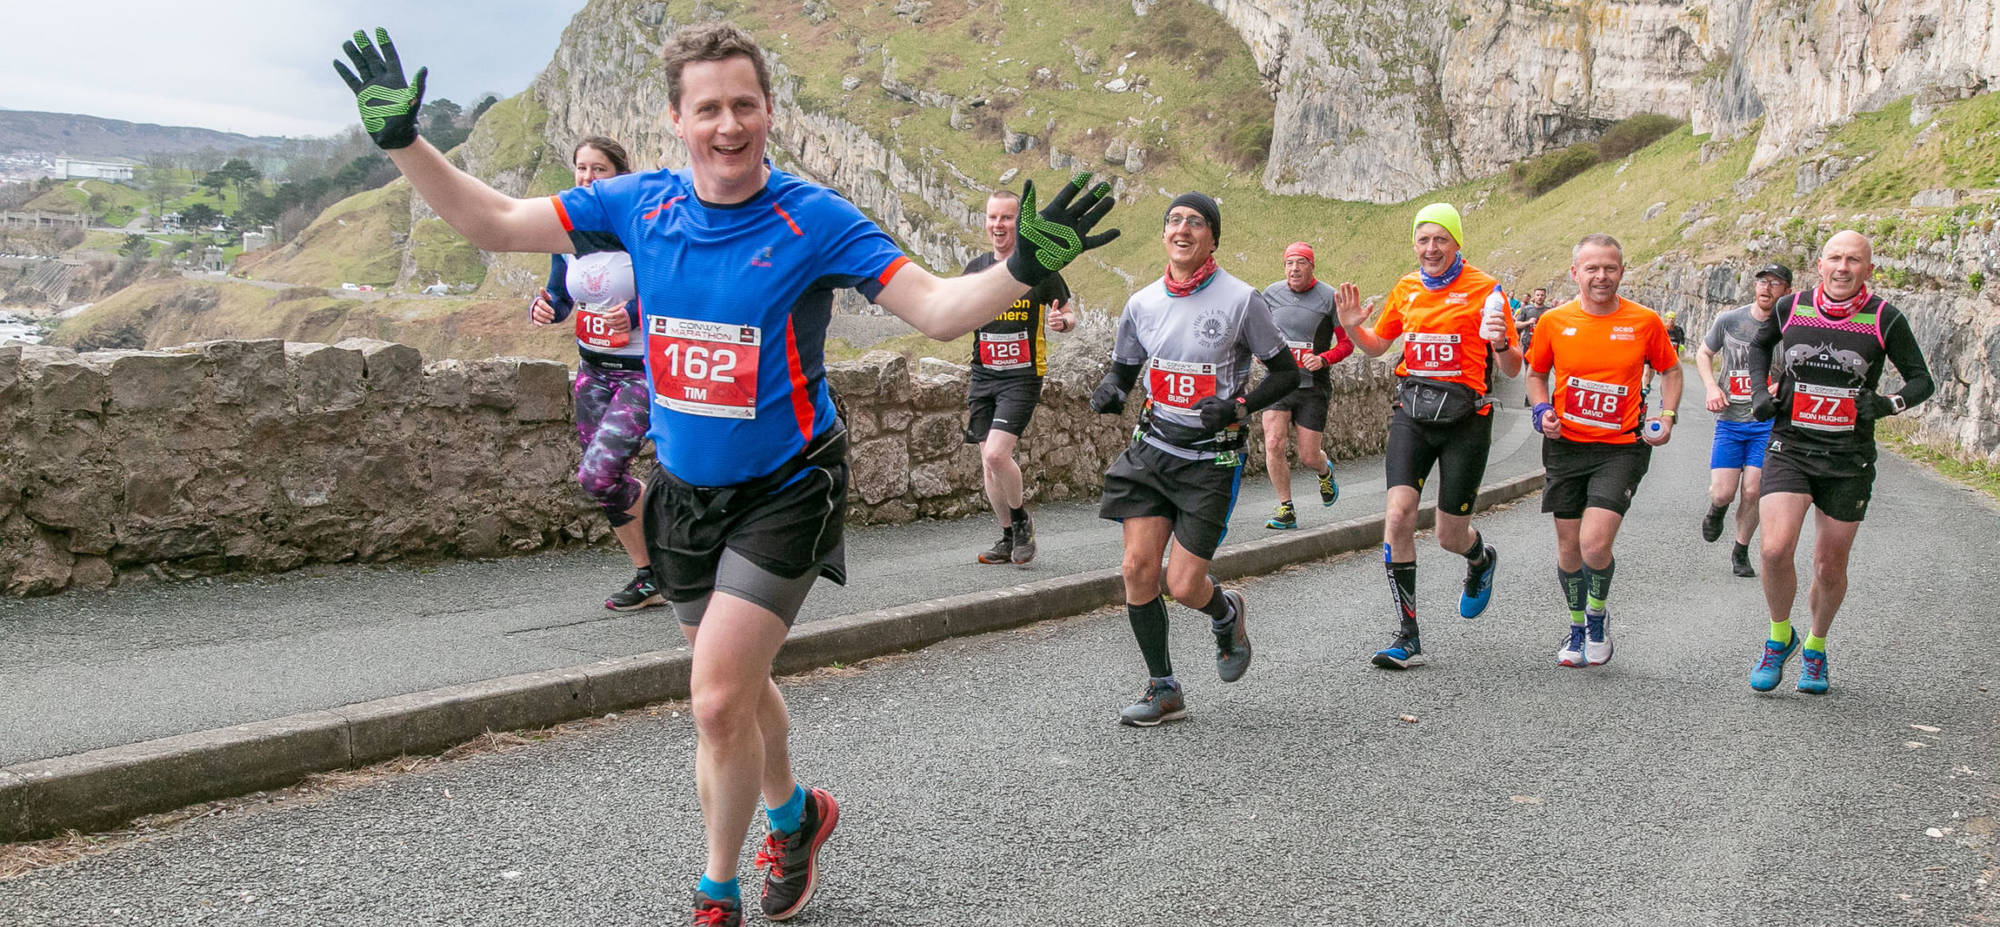 Runners on the Great Orme Llandudno in the Nick Beer 10k race